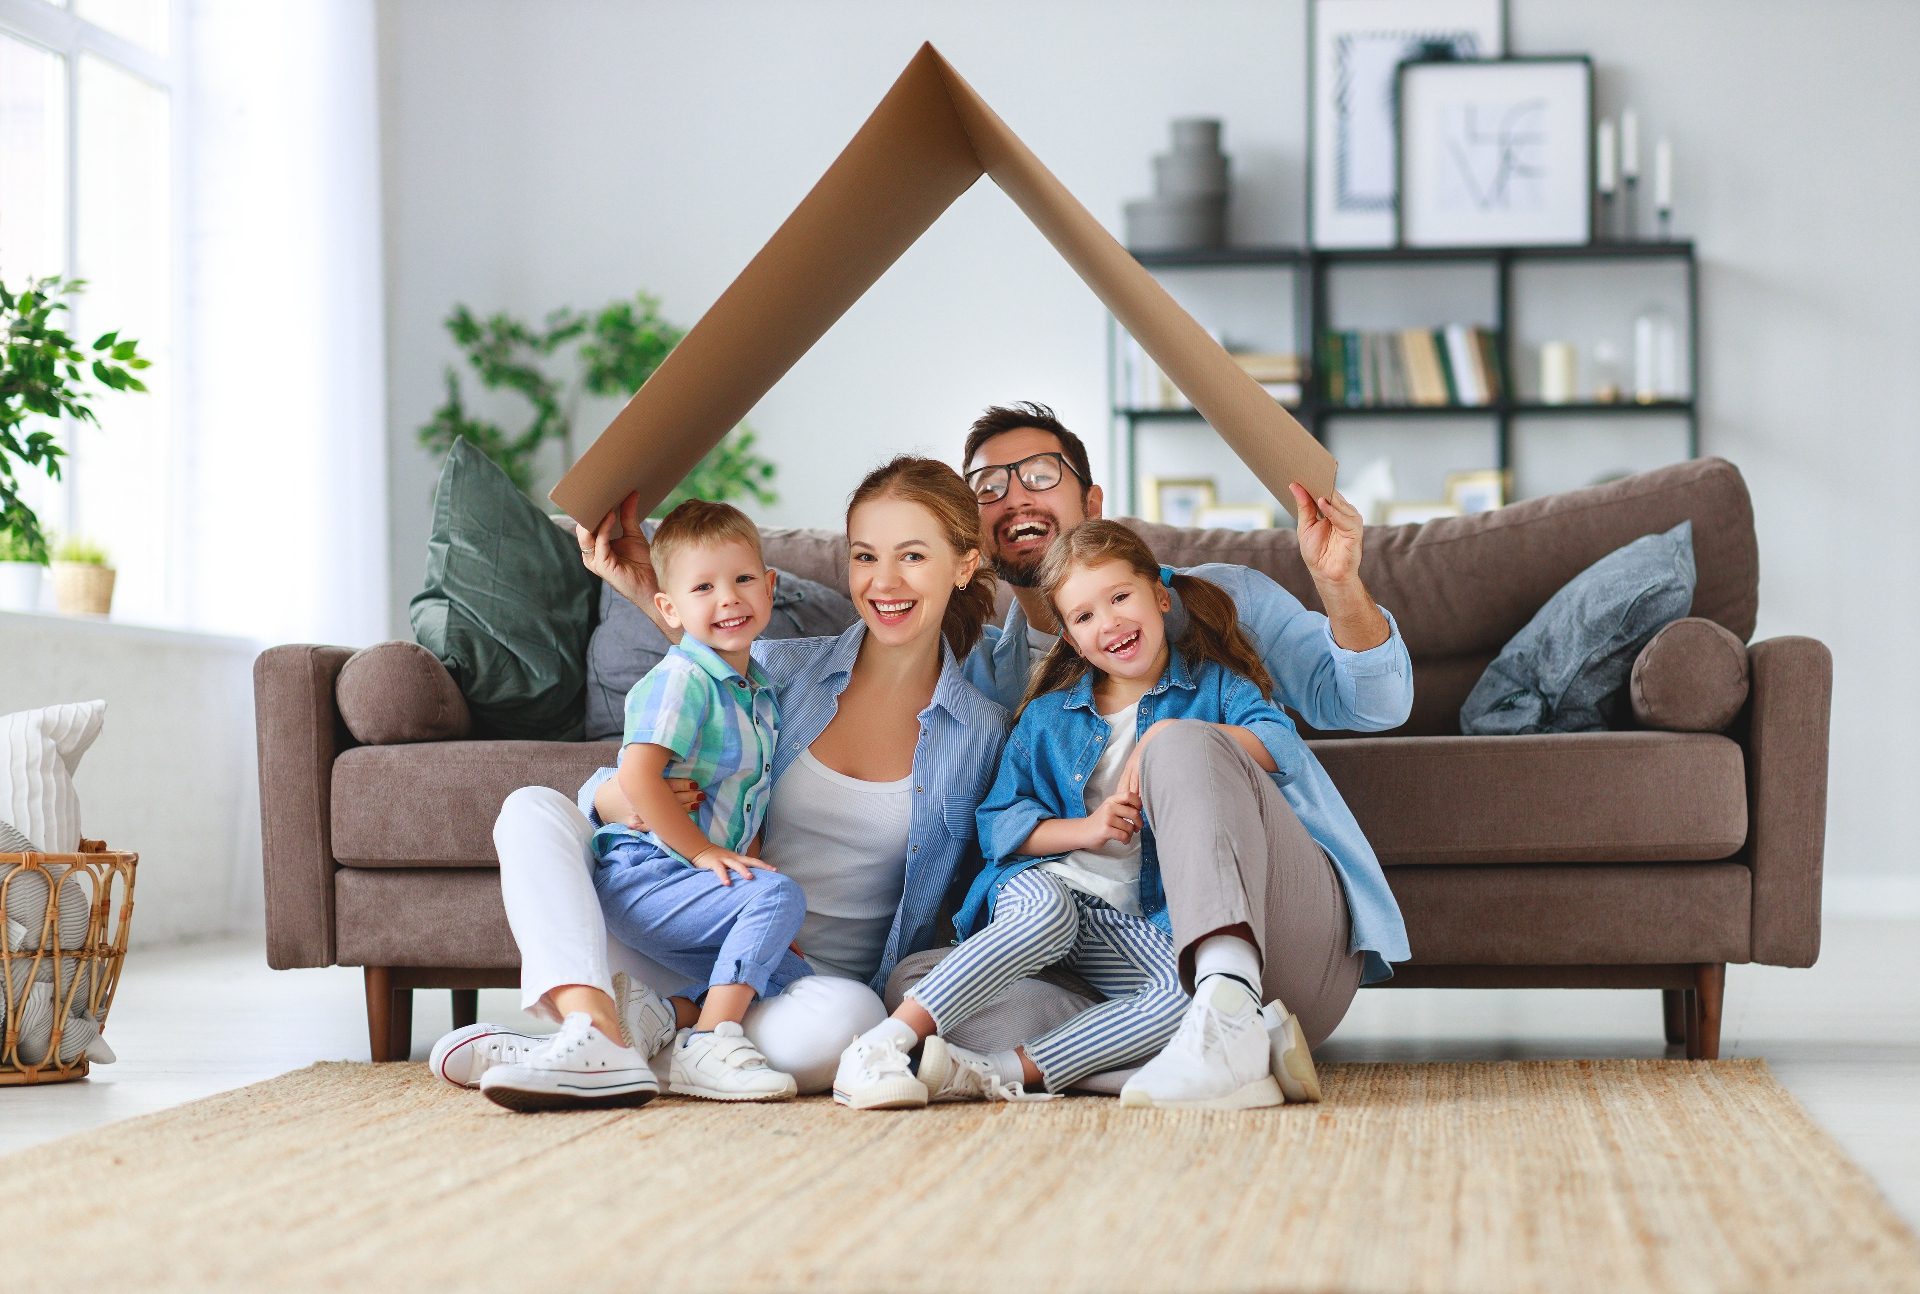 Home Loans Perth - Family in a home image